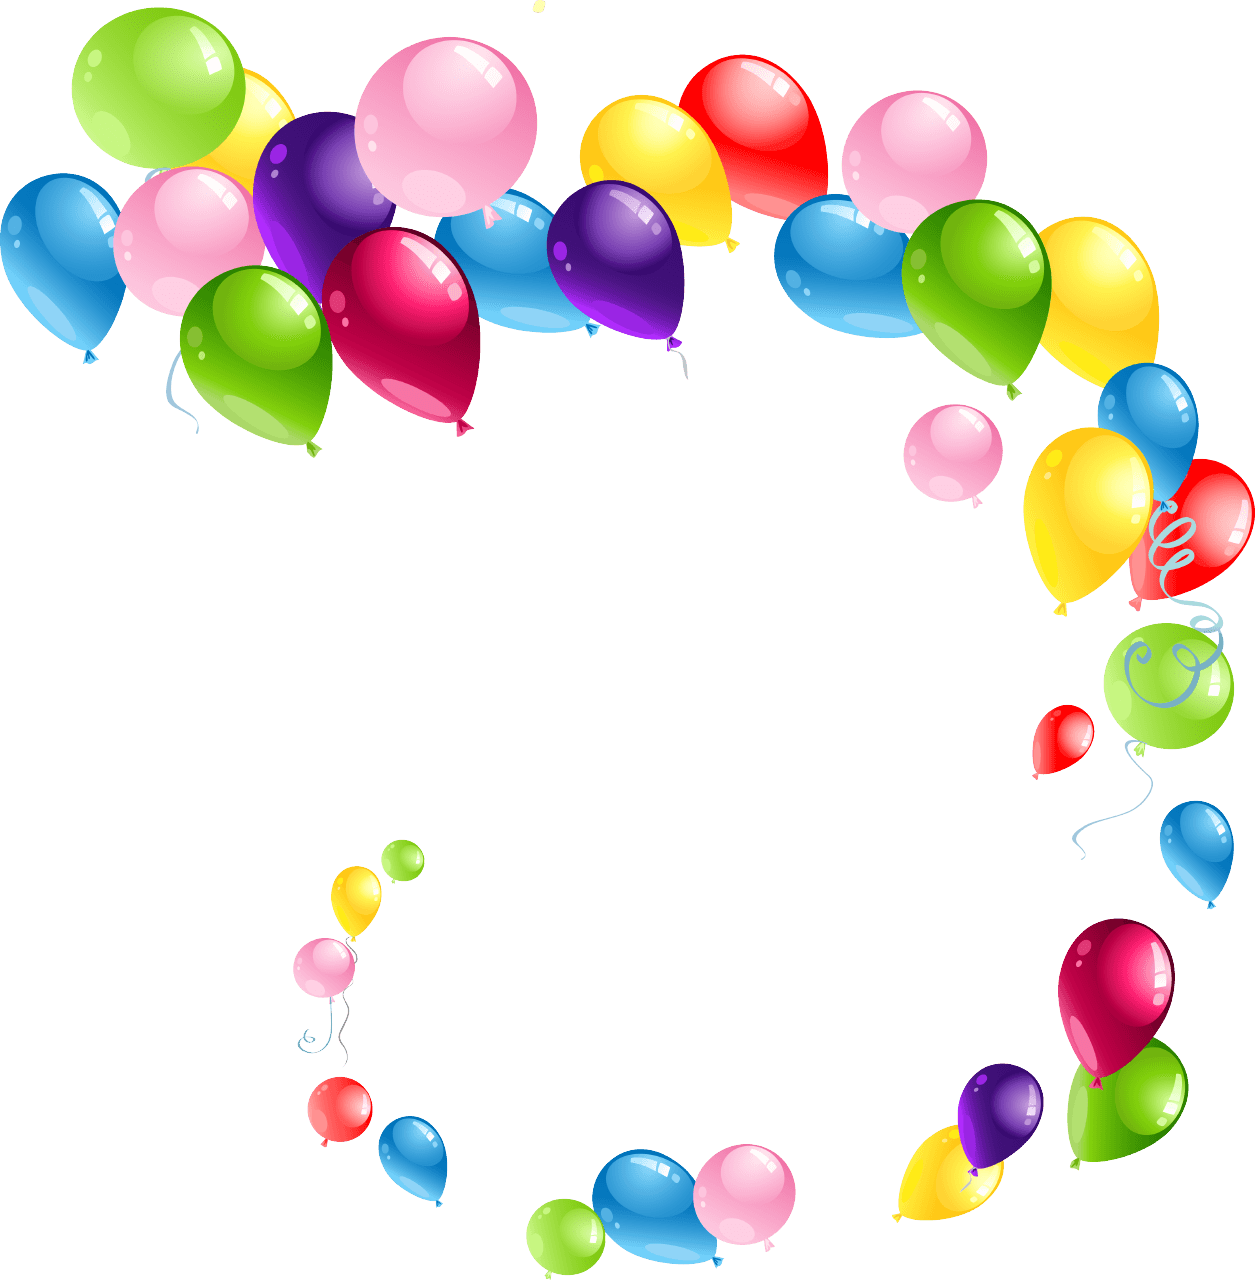 Balloons PNG High-Quality Image